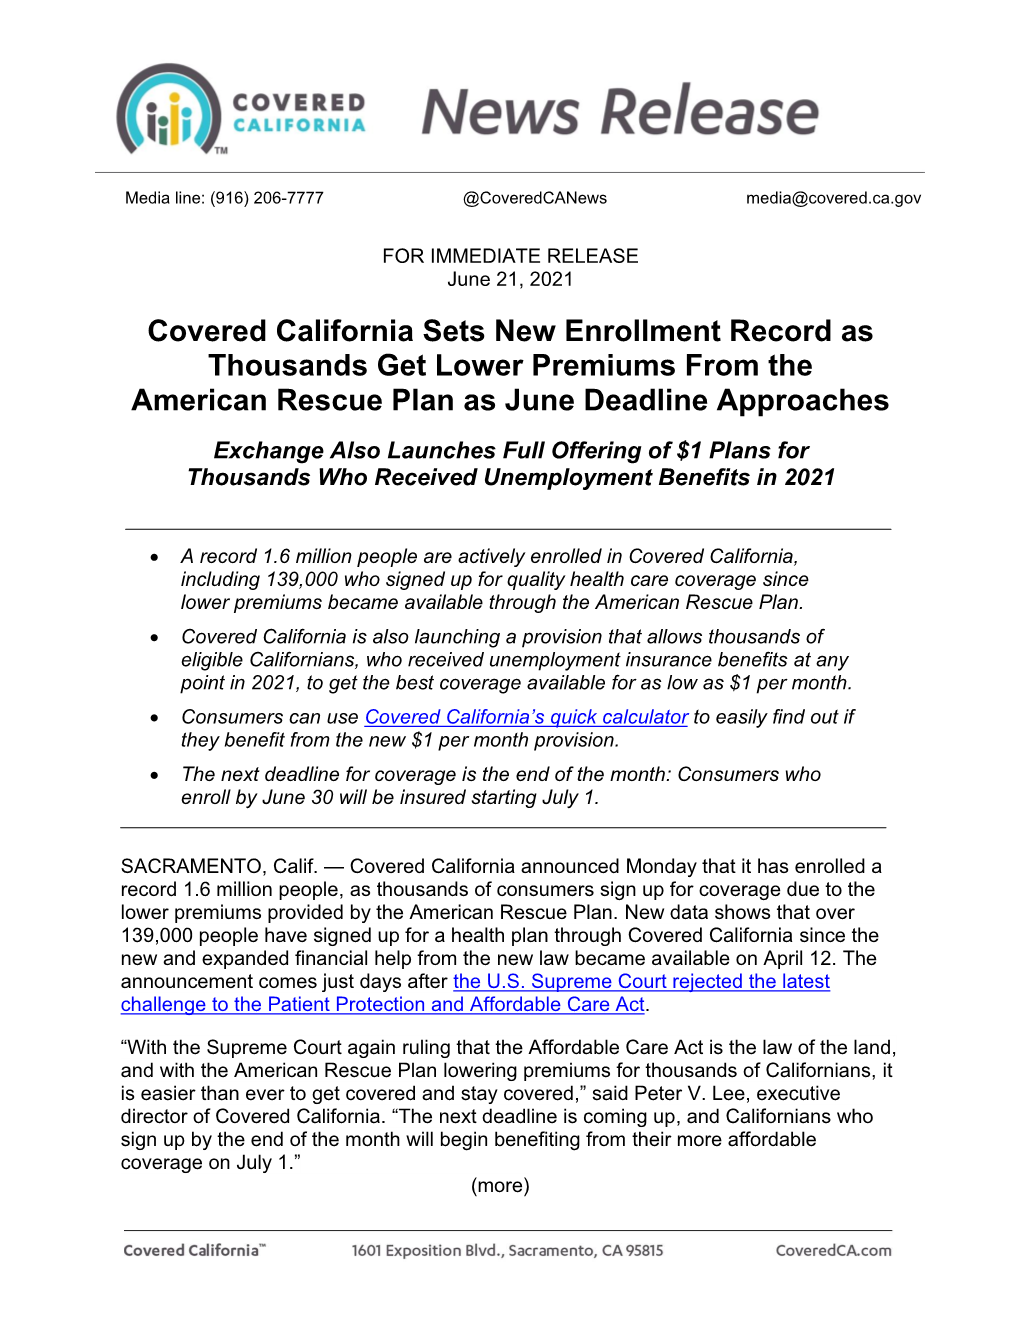 Covered California Sets New Enrollment Record As Thousands